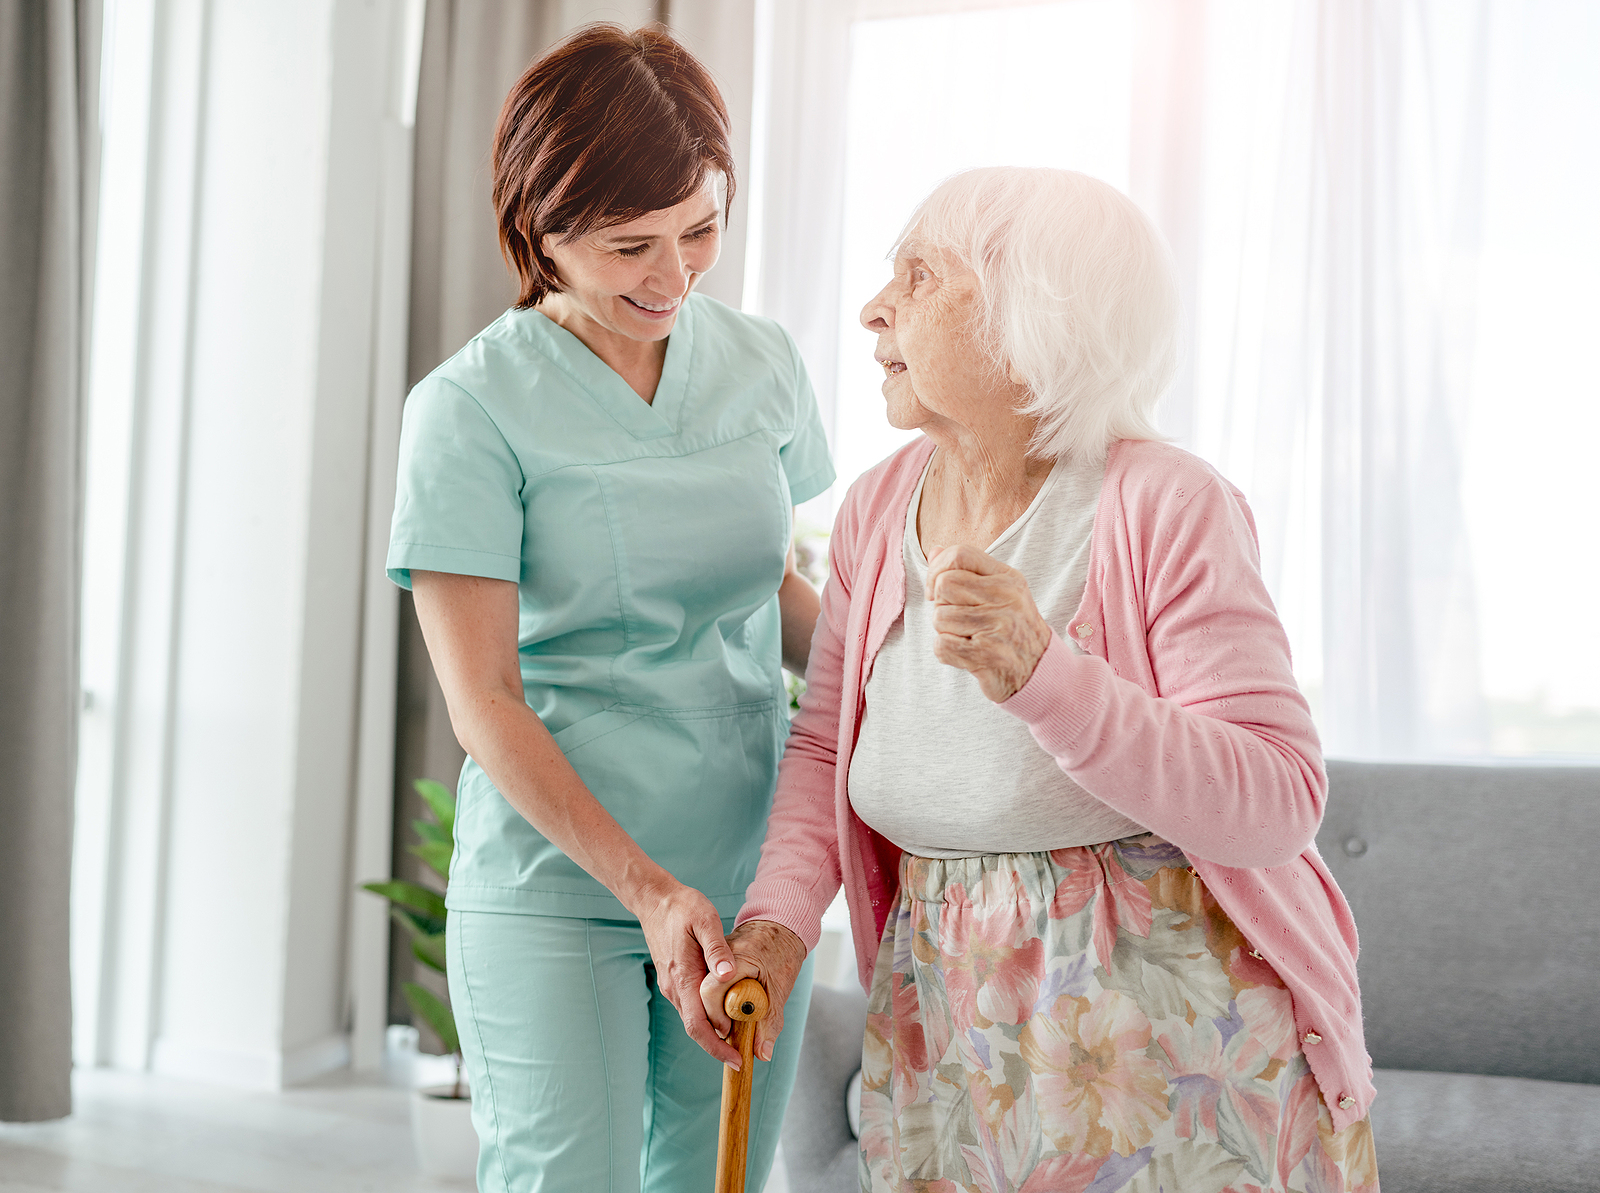 How Valuable Can Home Care Be for Your Senior?